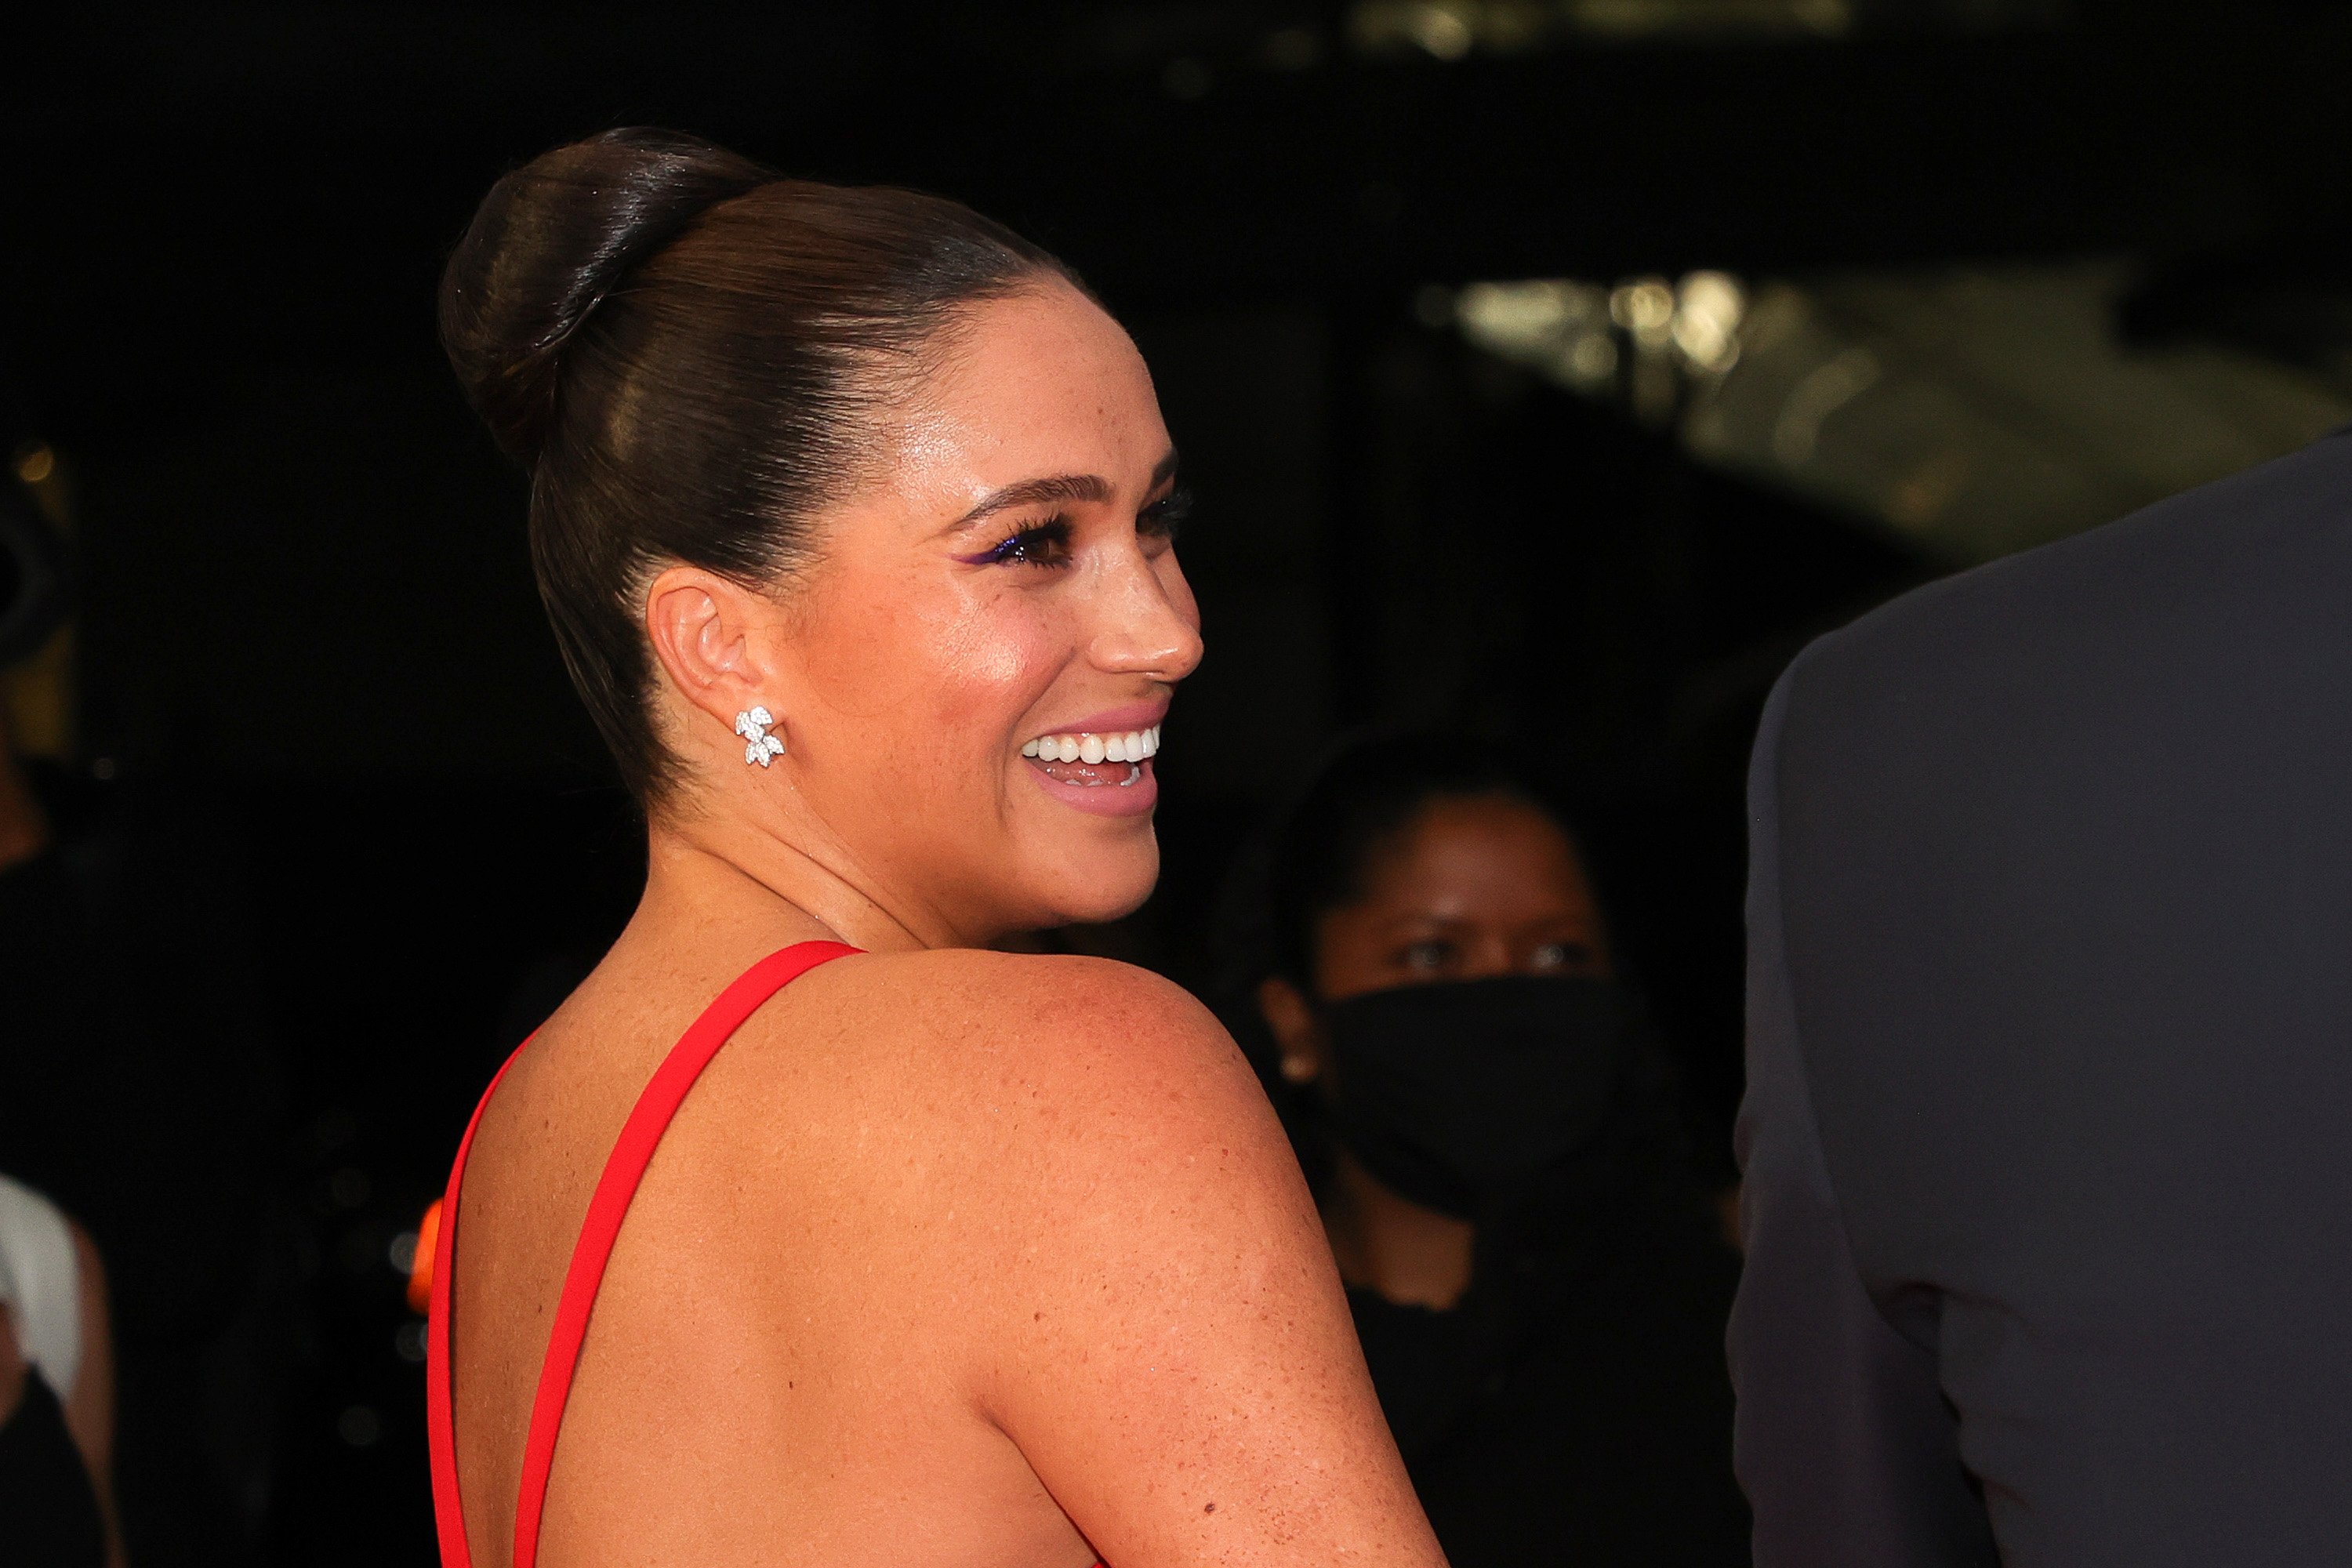 Meghan Markle, who ran the blog The Tig before marrying Prince Harry, seen from behind smiling and looking to her right